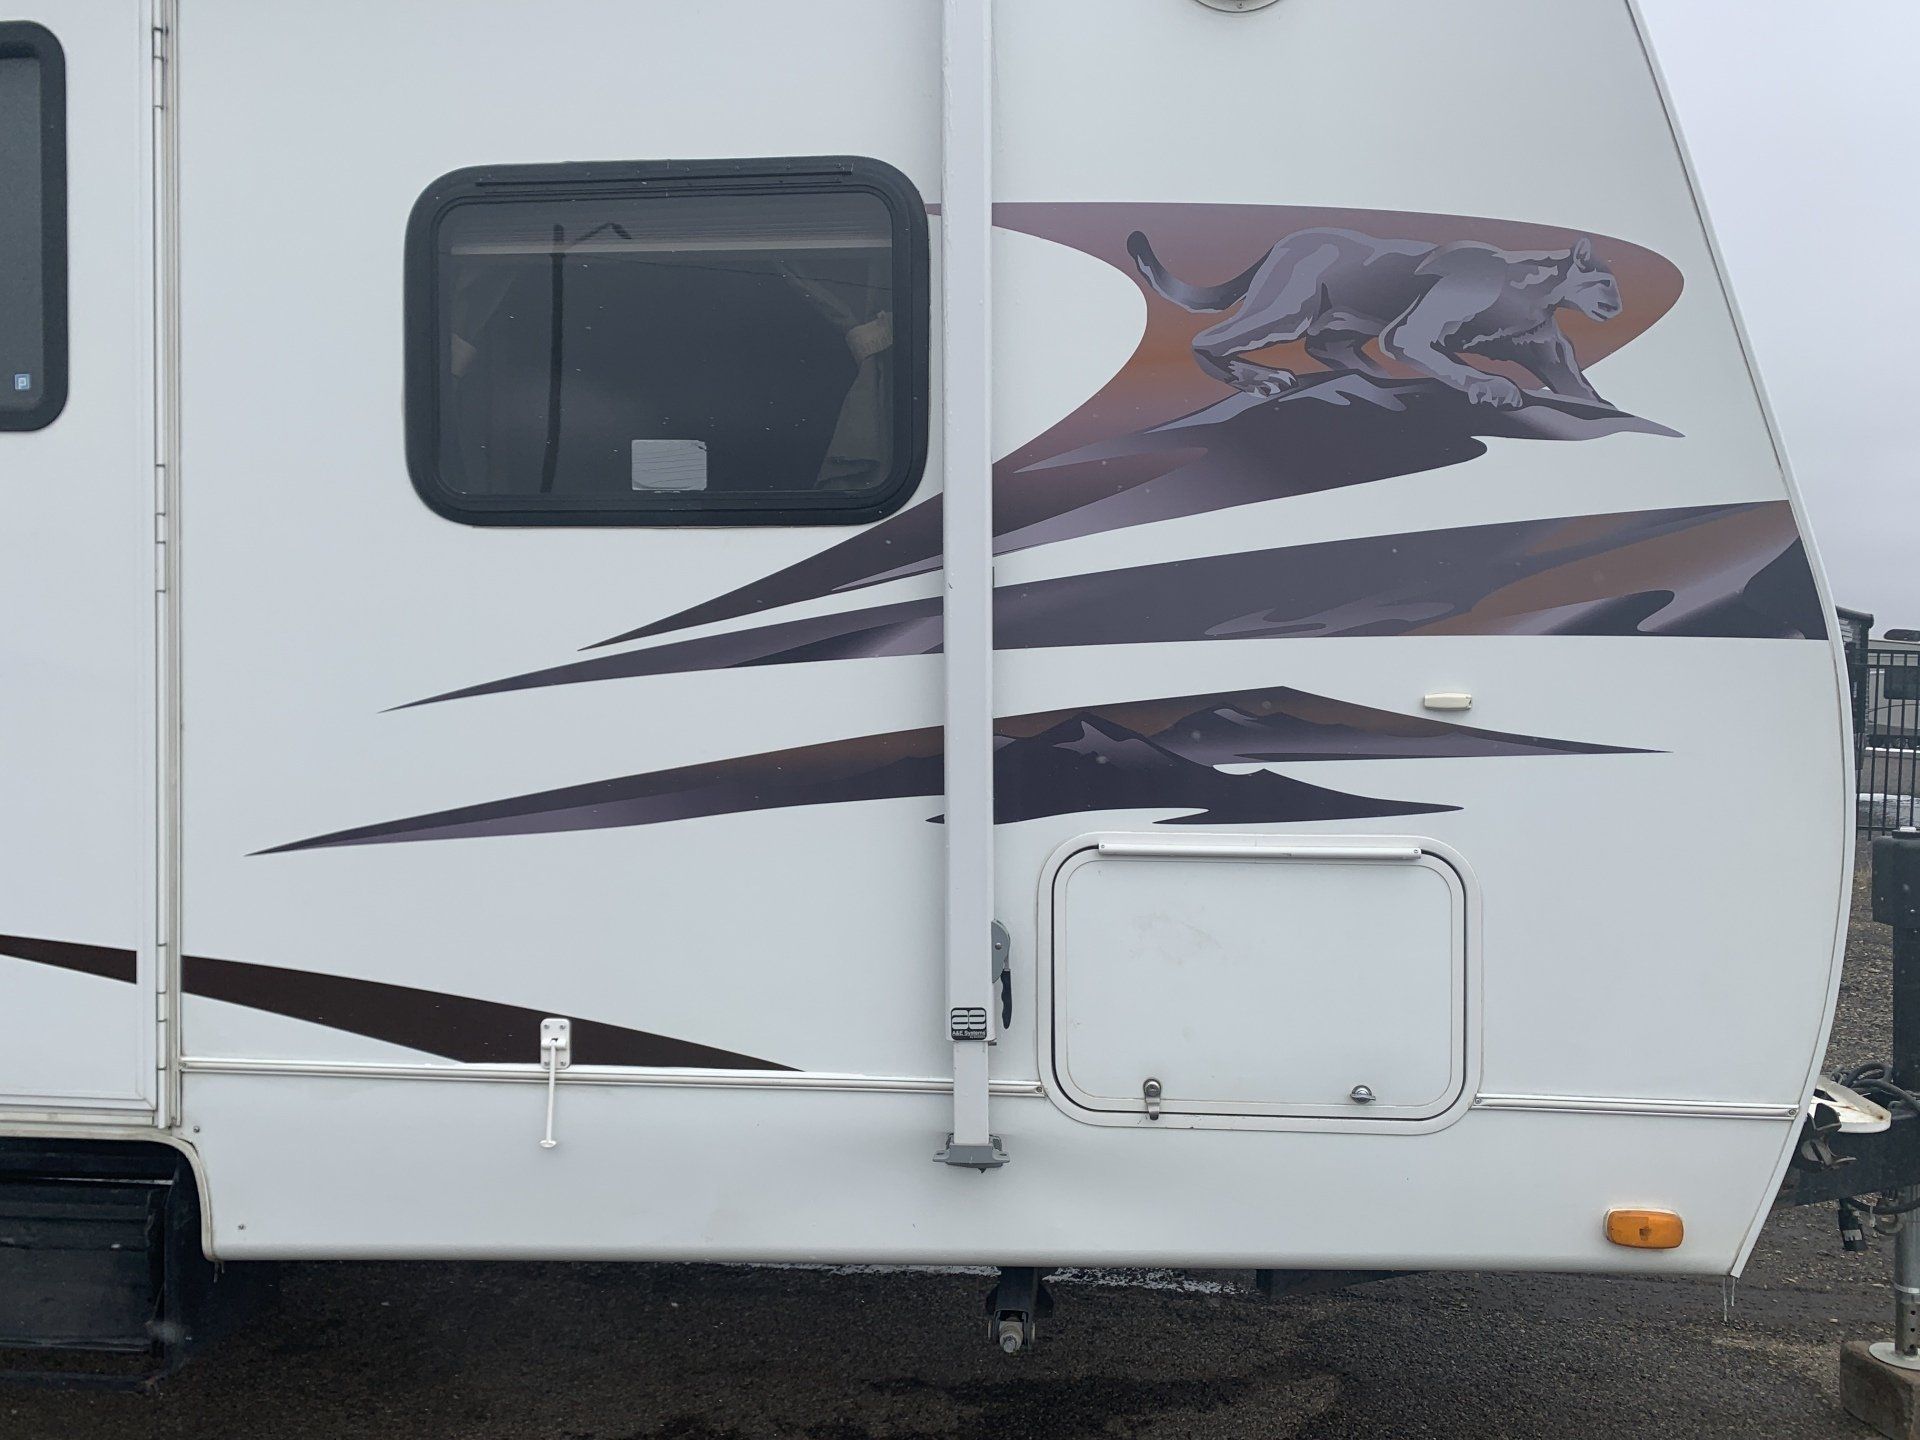 2020 - Alberta's Worst RV Decal Contest - Grand Prize Winner - Before & After - Pic 7